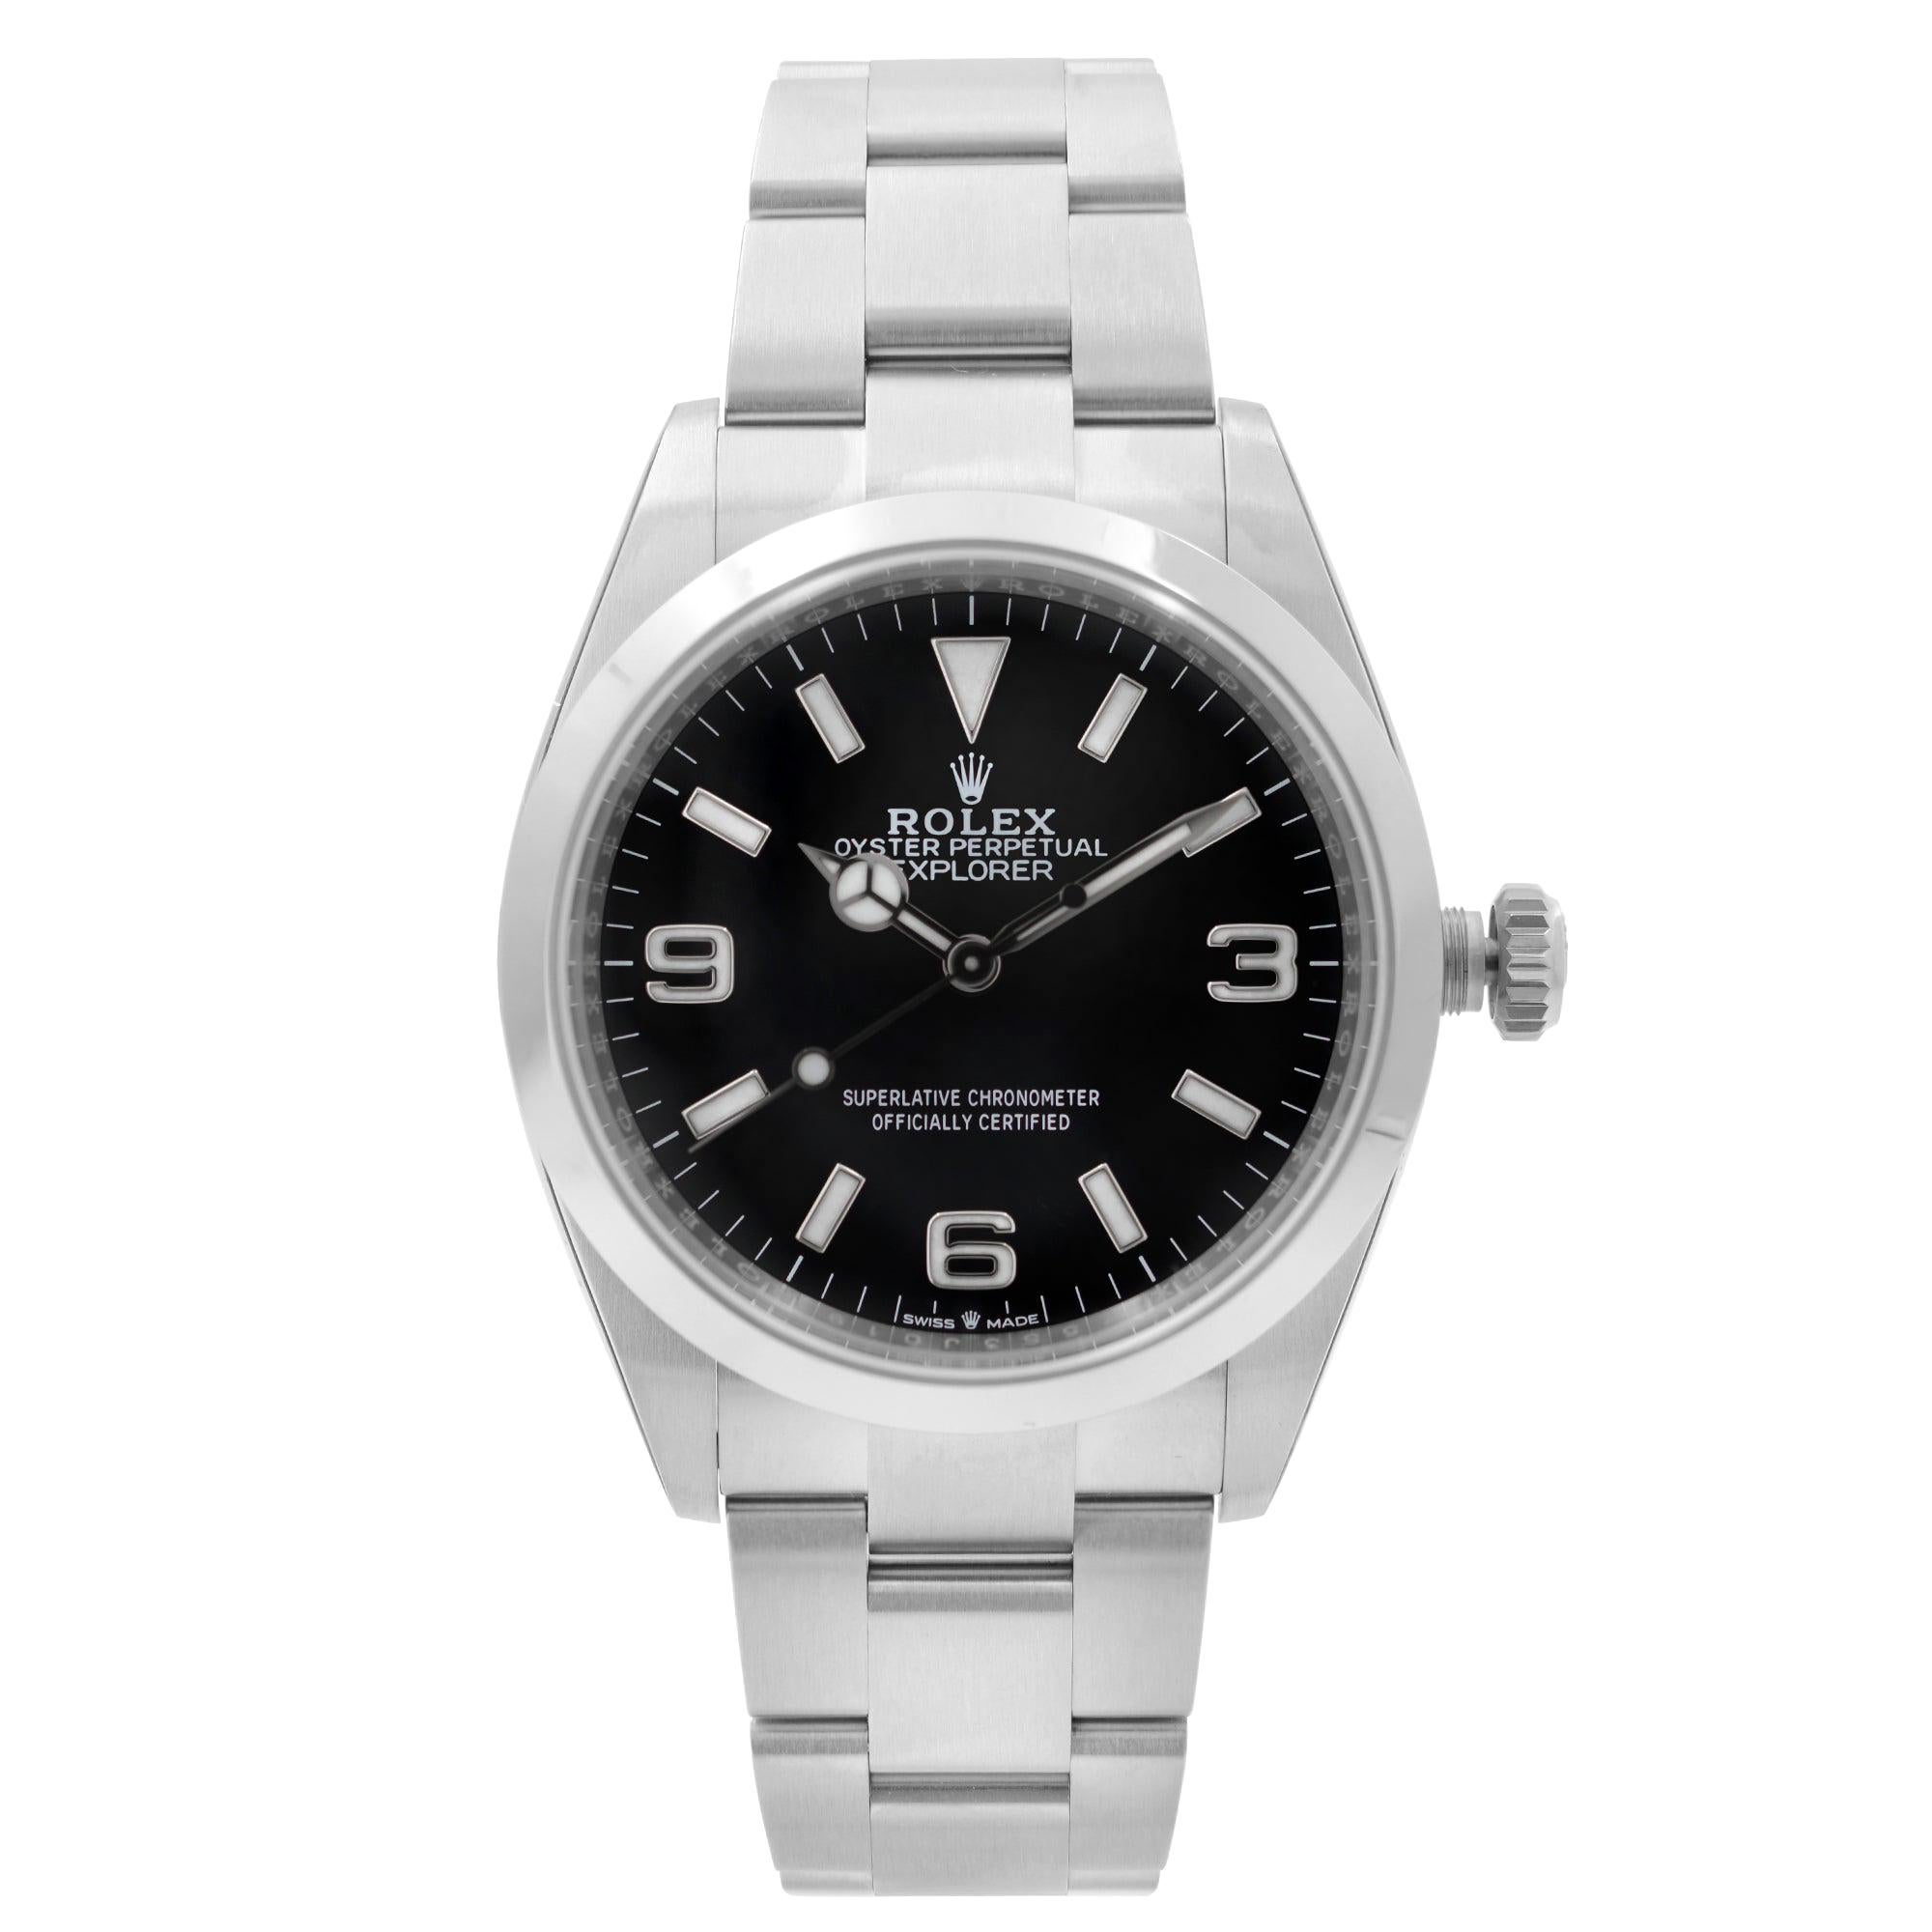 Rolex Explorer Stainless Steel Black Dial Automatic Mens Watch 124270